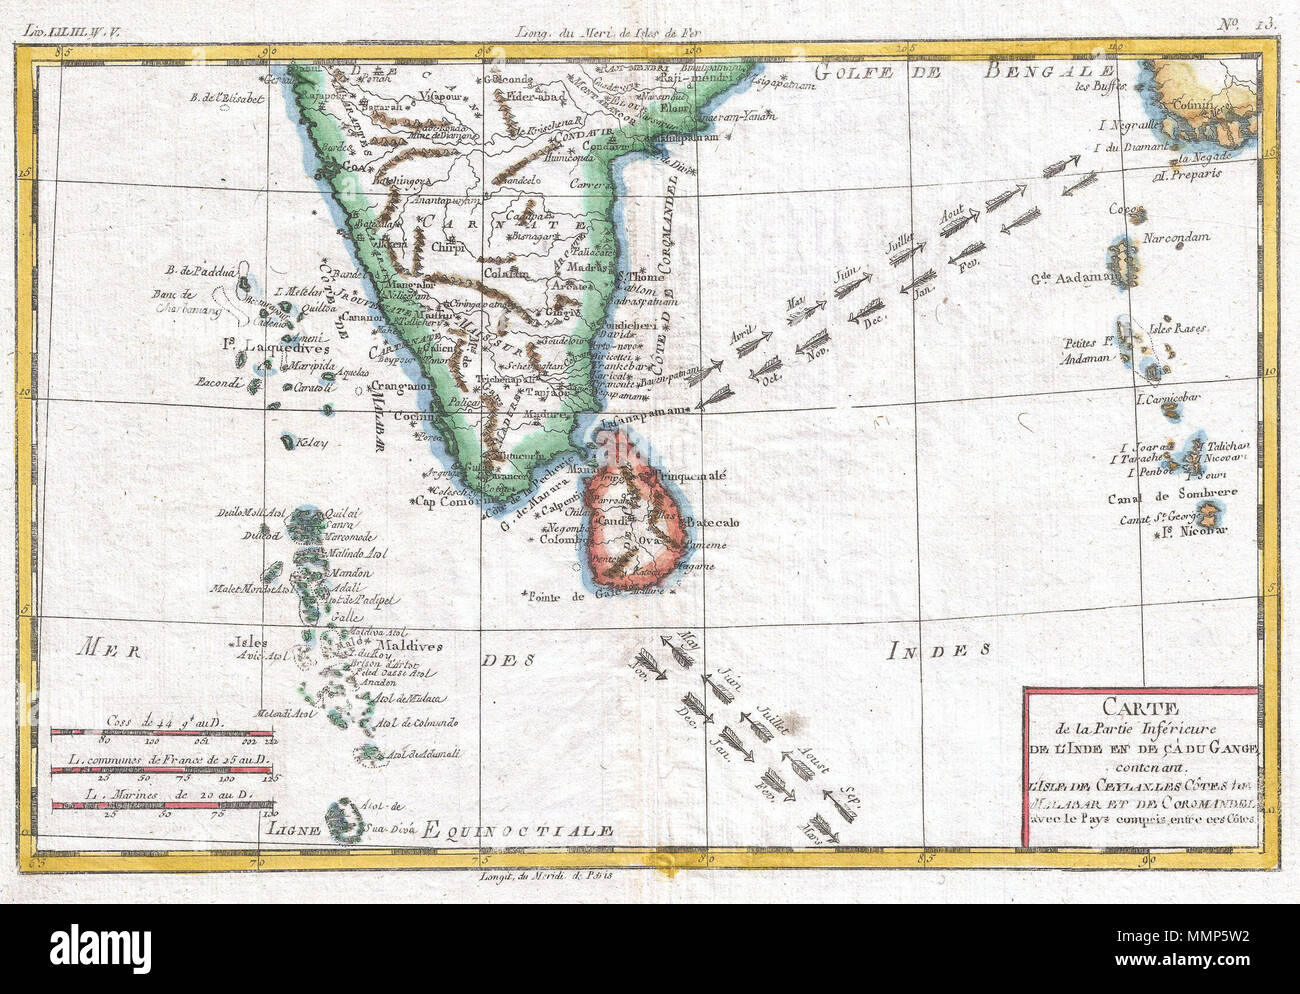 .  English: A fine example of Rigobert Bonne and G. Raynal’s 1780 map of Southern India. Includes the island of Sri Lanka as well as the Maldives and Andaman and Nicobar Island chains. Arrows in the Indian ocean show the direction of the trade wines in different seasons. Highly detailed, showing towns, rivers, some topographical features, ports and political boundaries. Drawn by R. Bonne for G. Raynal’s Atlas de Toutes les Parties Connues du Globe Terrestre, Dressé pour l'Histoire Philosophique et Politique des Établissemens et du Commerce des Européens dans les Deux Indes .  Carte De La Parti Stock Photo